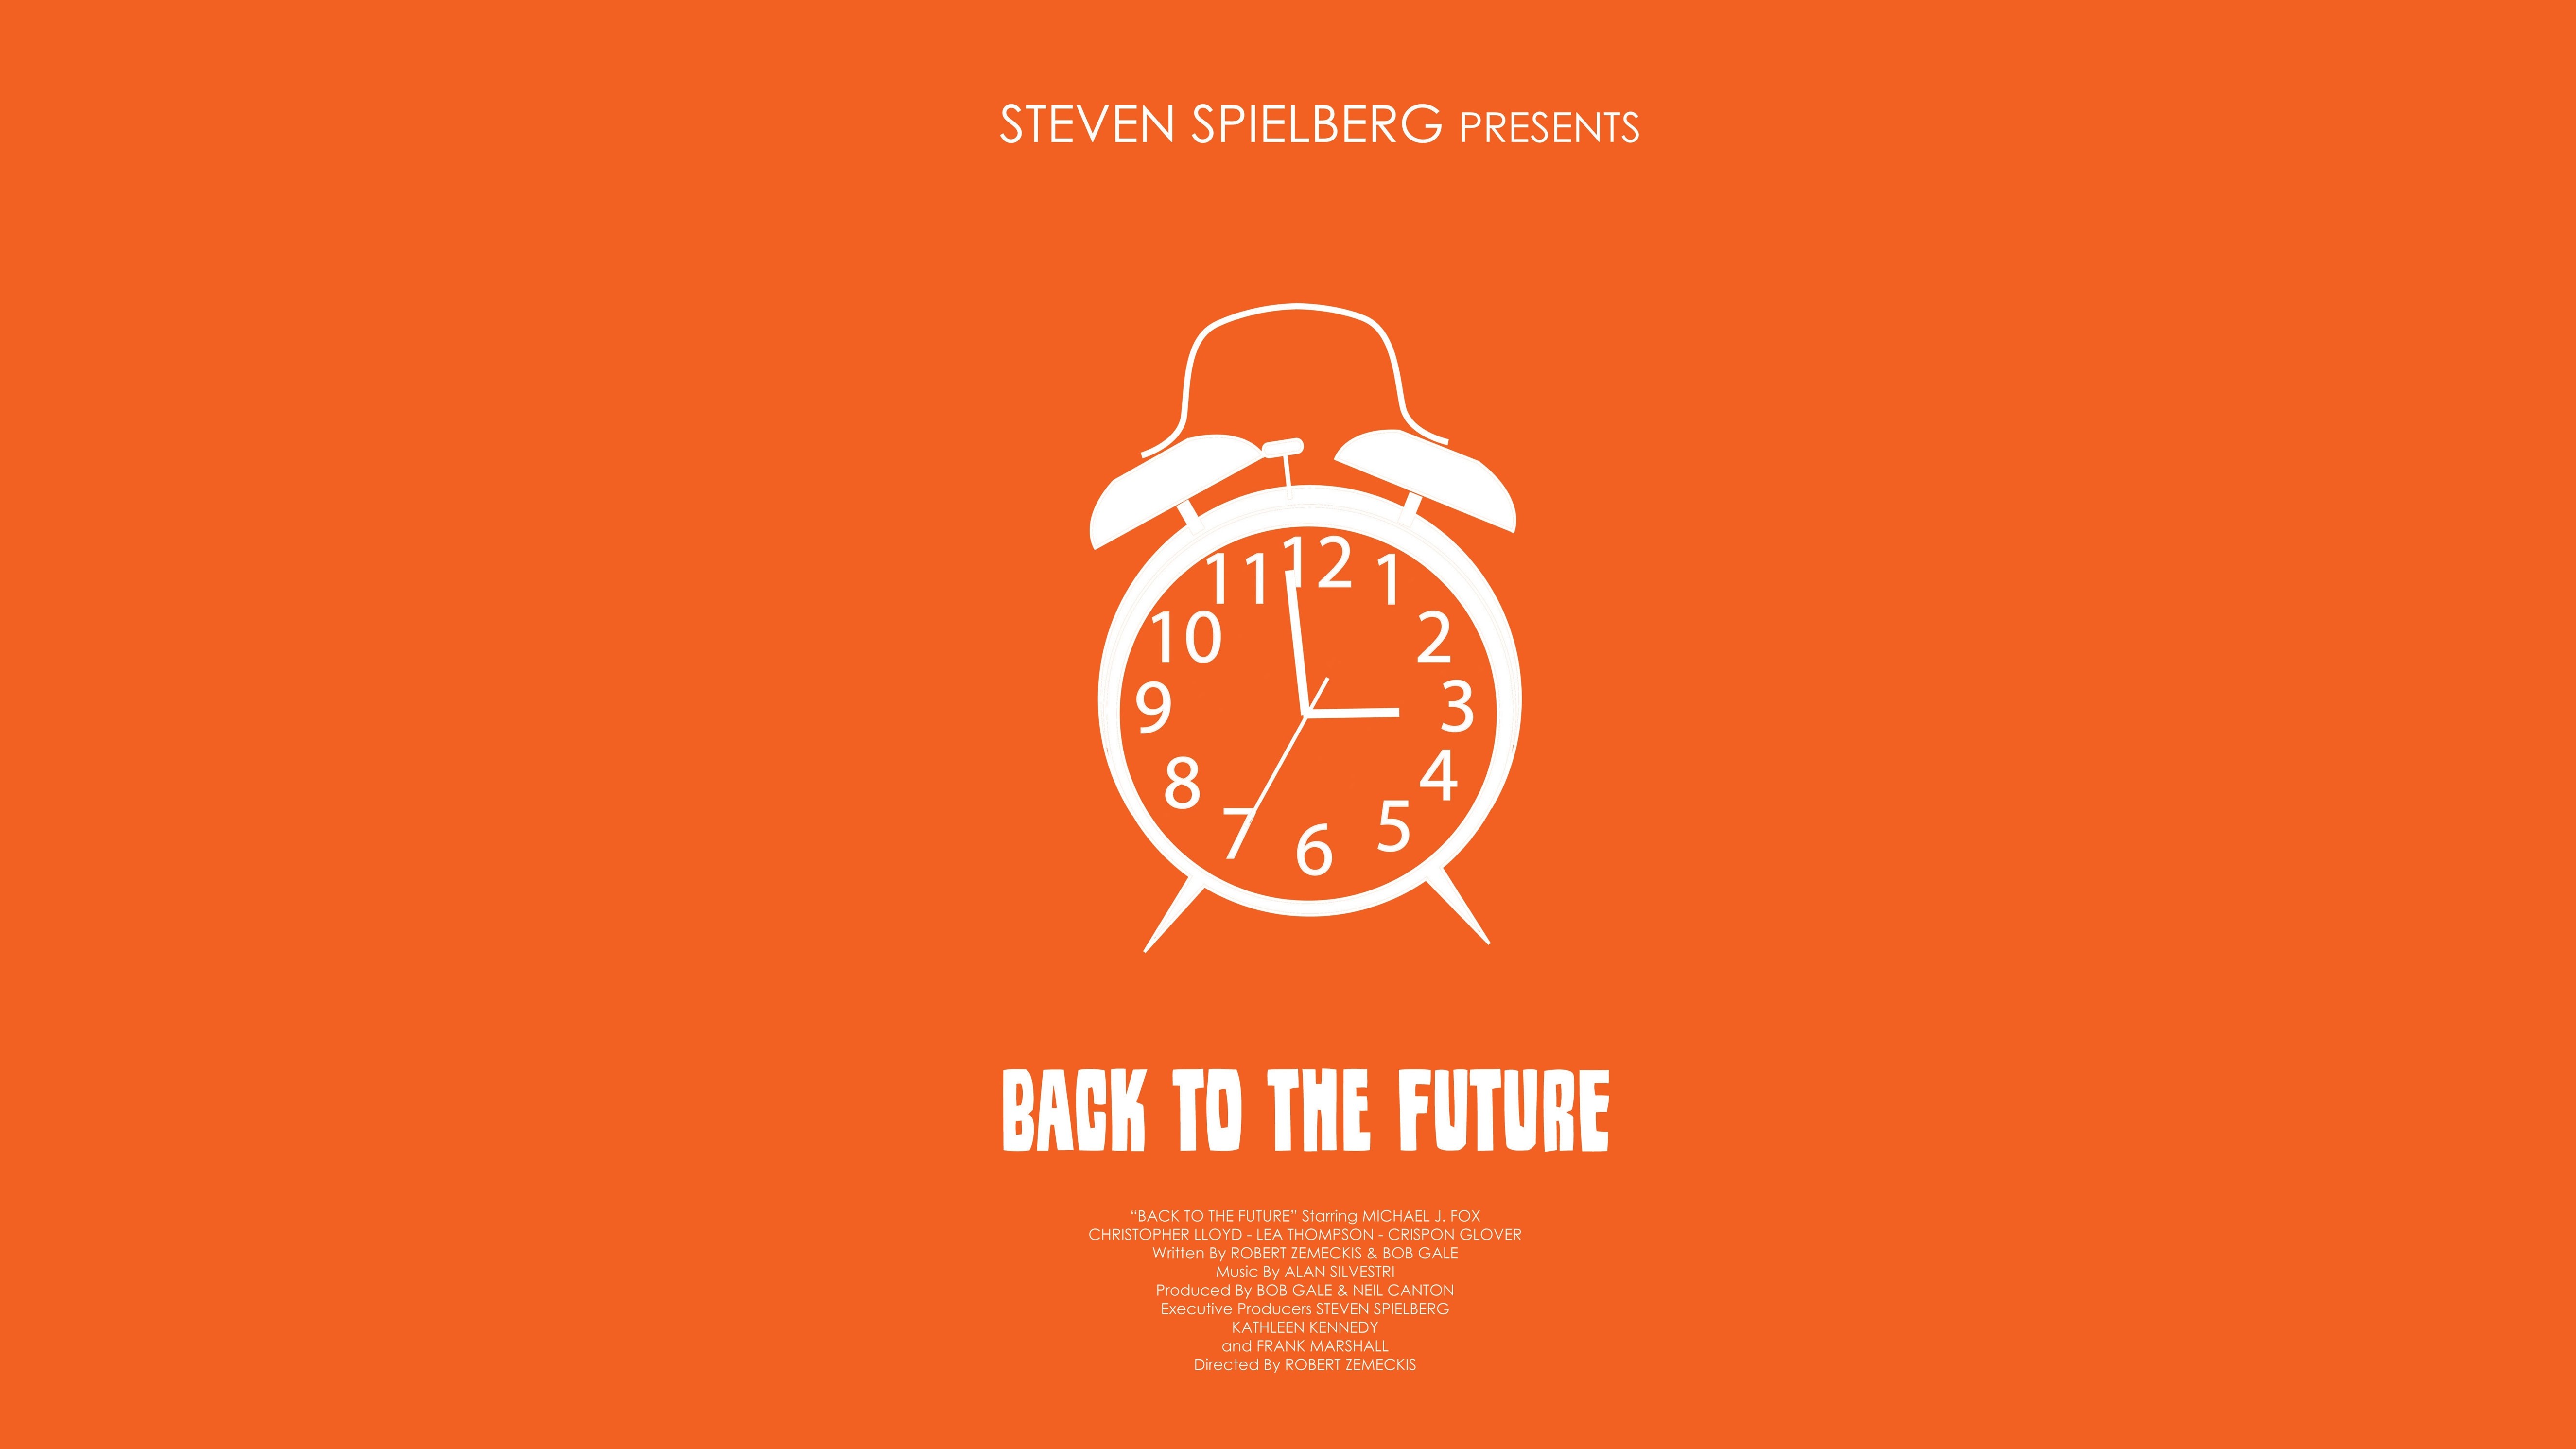  minimalism  Back To The Future Movies  Artwork Steven 